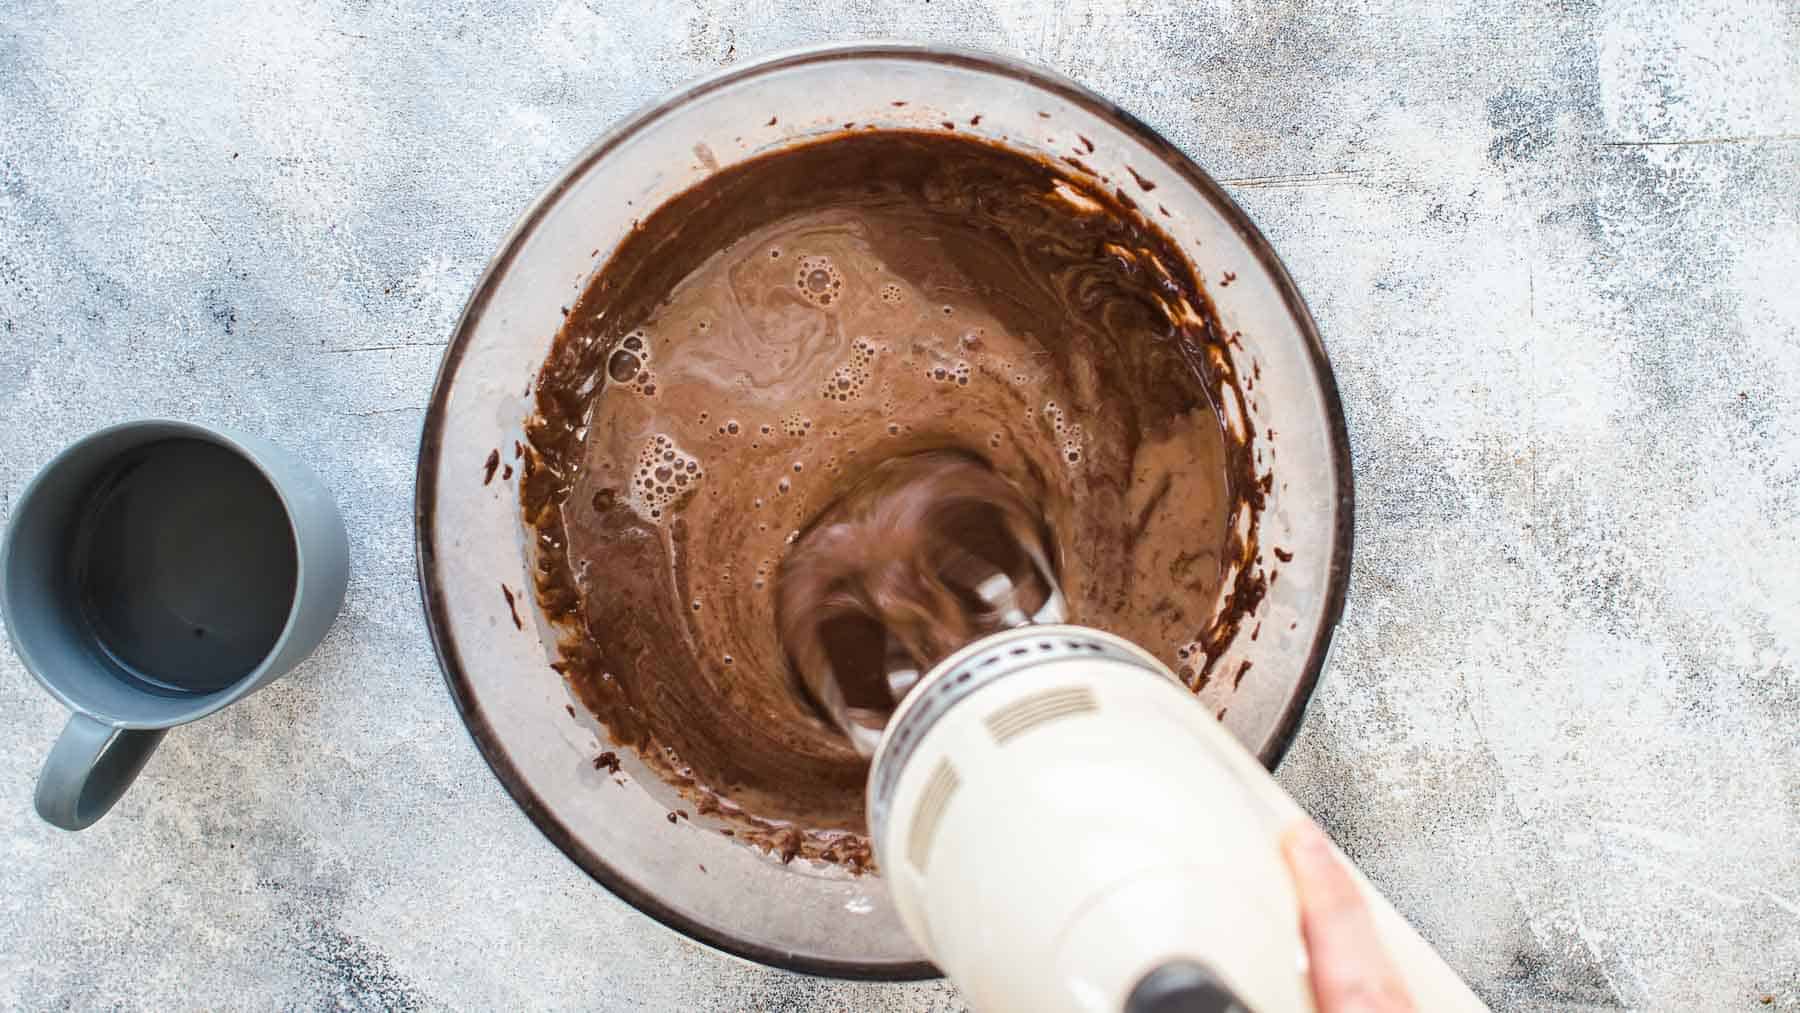 Adding hot water to the chocolate cake batter